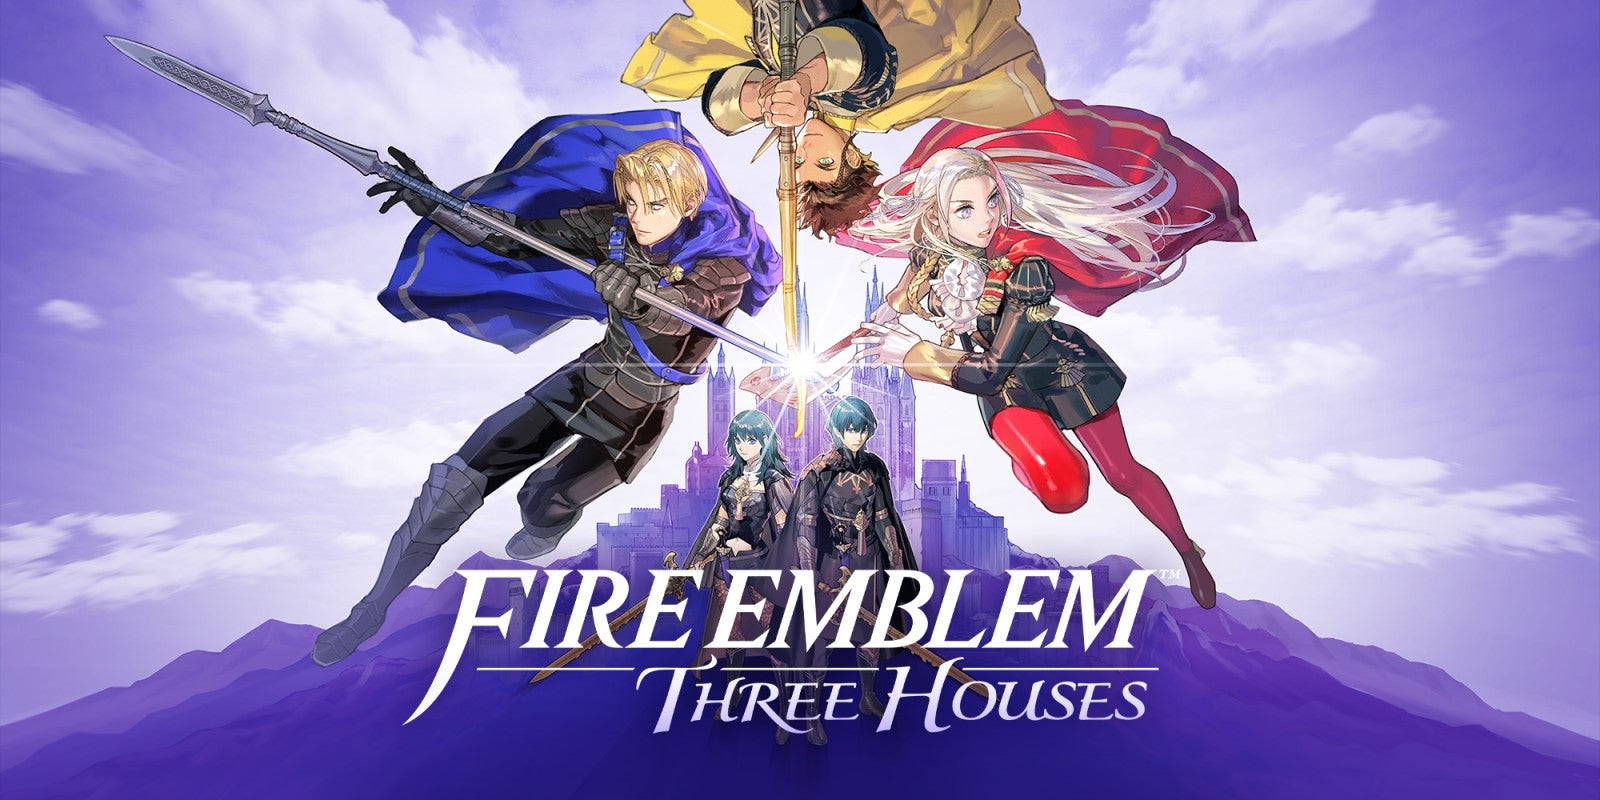 Image for Save $10 on Fire Emblem: Three Houses on launch day at Wal-Mart (US Only)